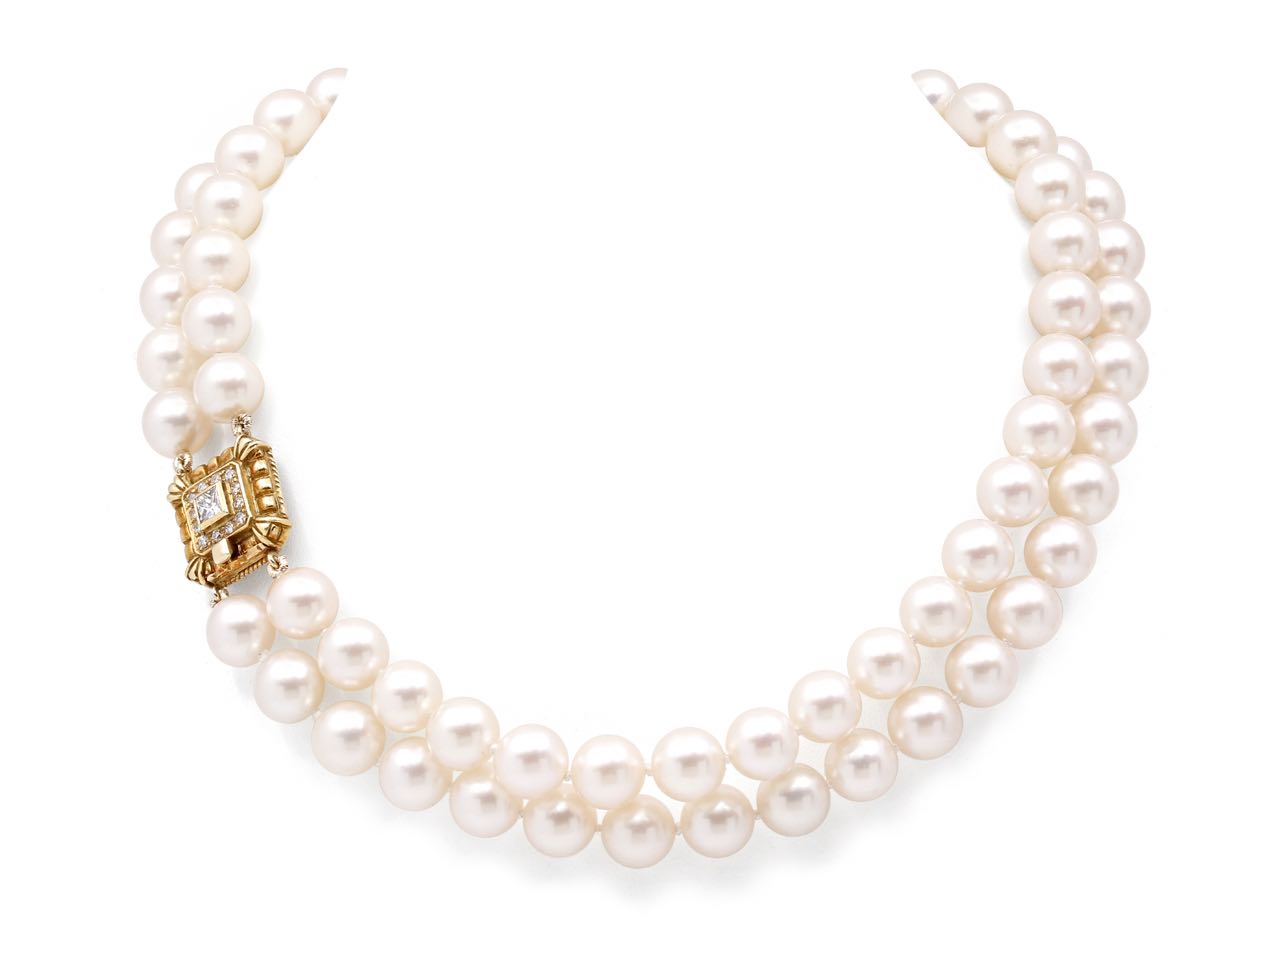 5 Double Strand Pearl Necklaces Perfect For Any Occasion